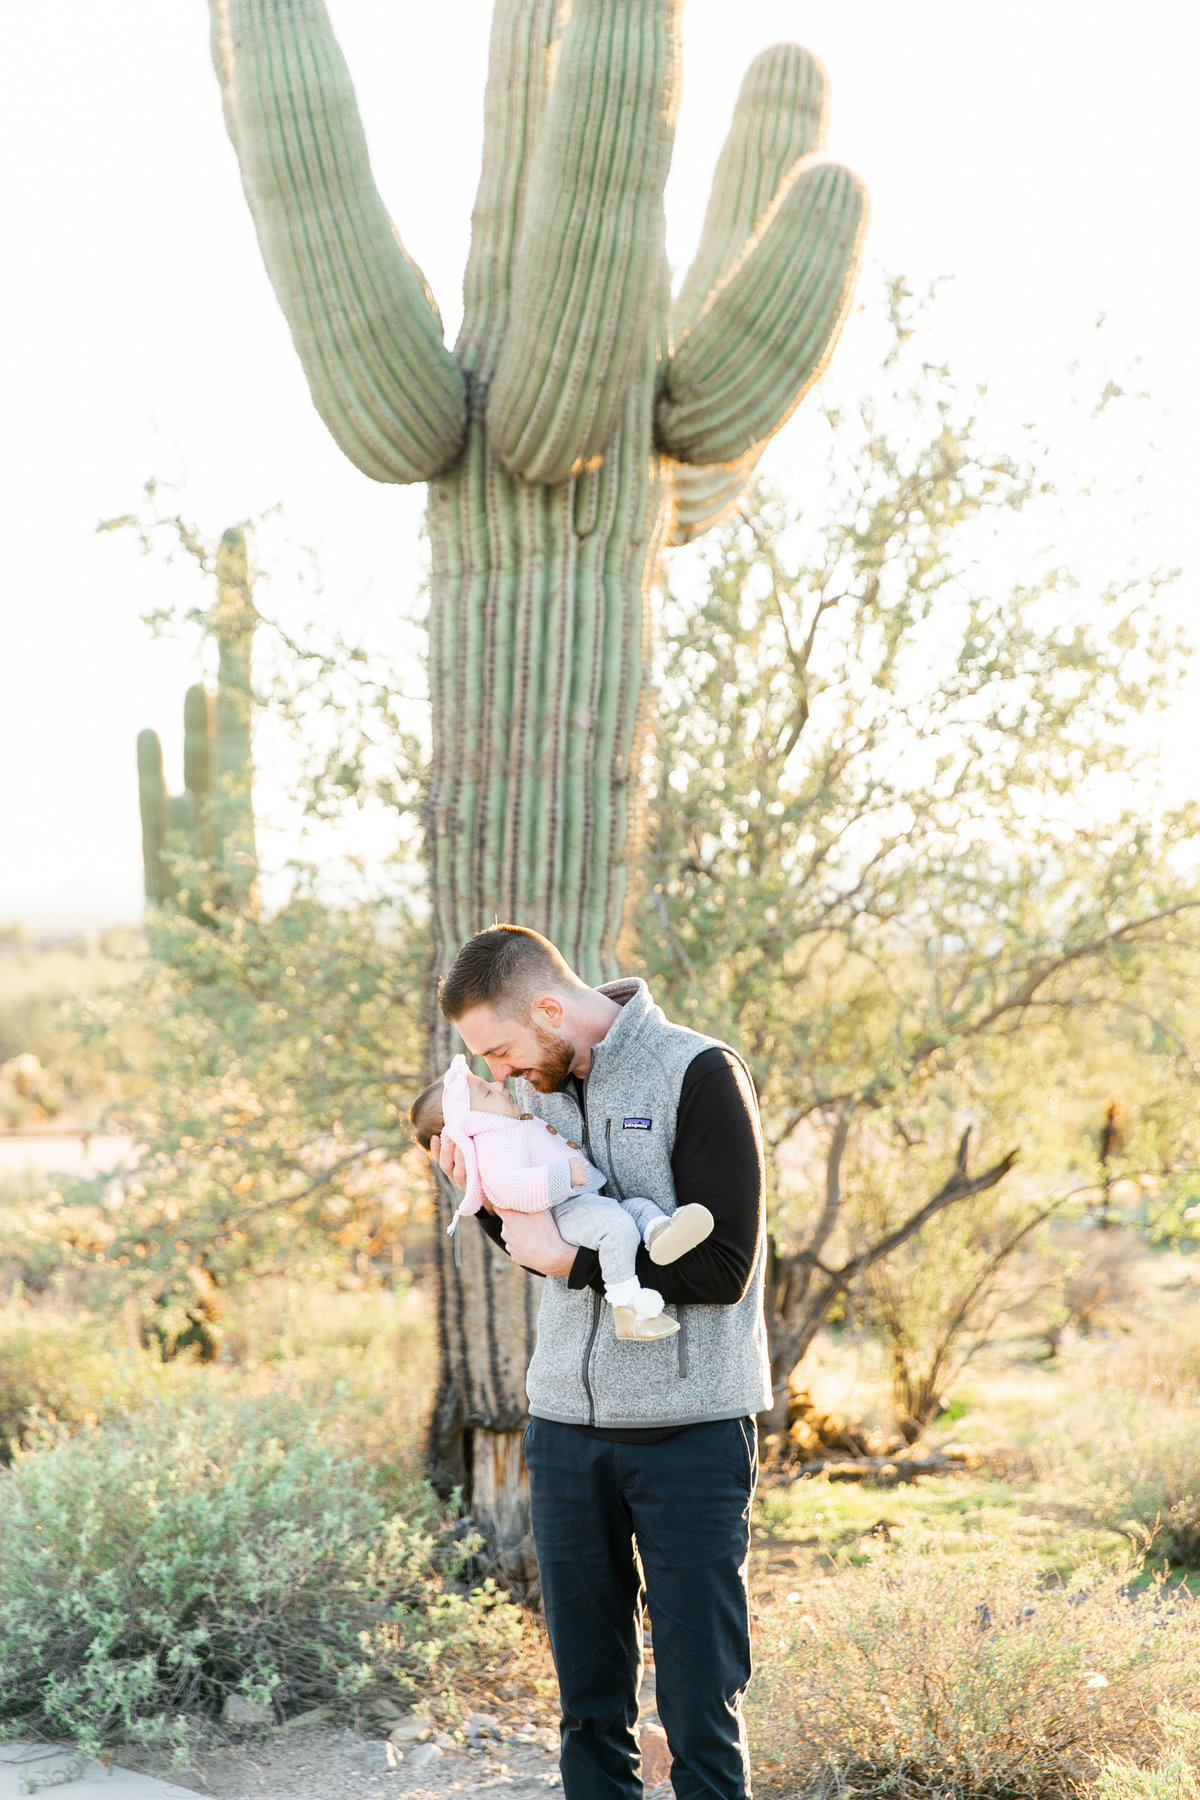 Karlie Colleen Photography - Scottsdale Family Photography - Lauren & Family-97